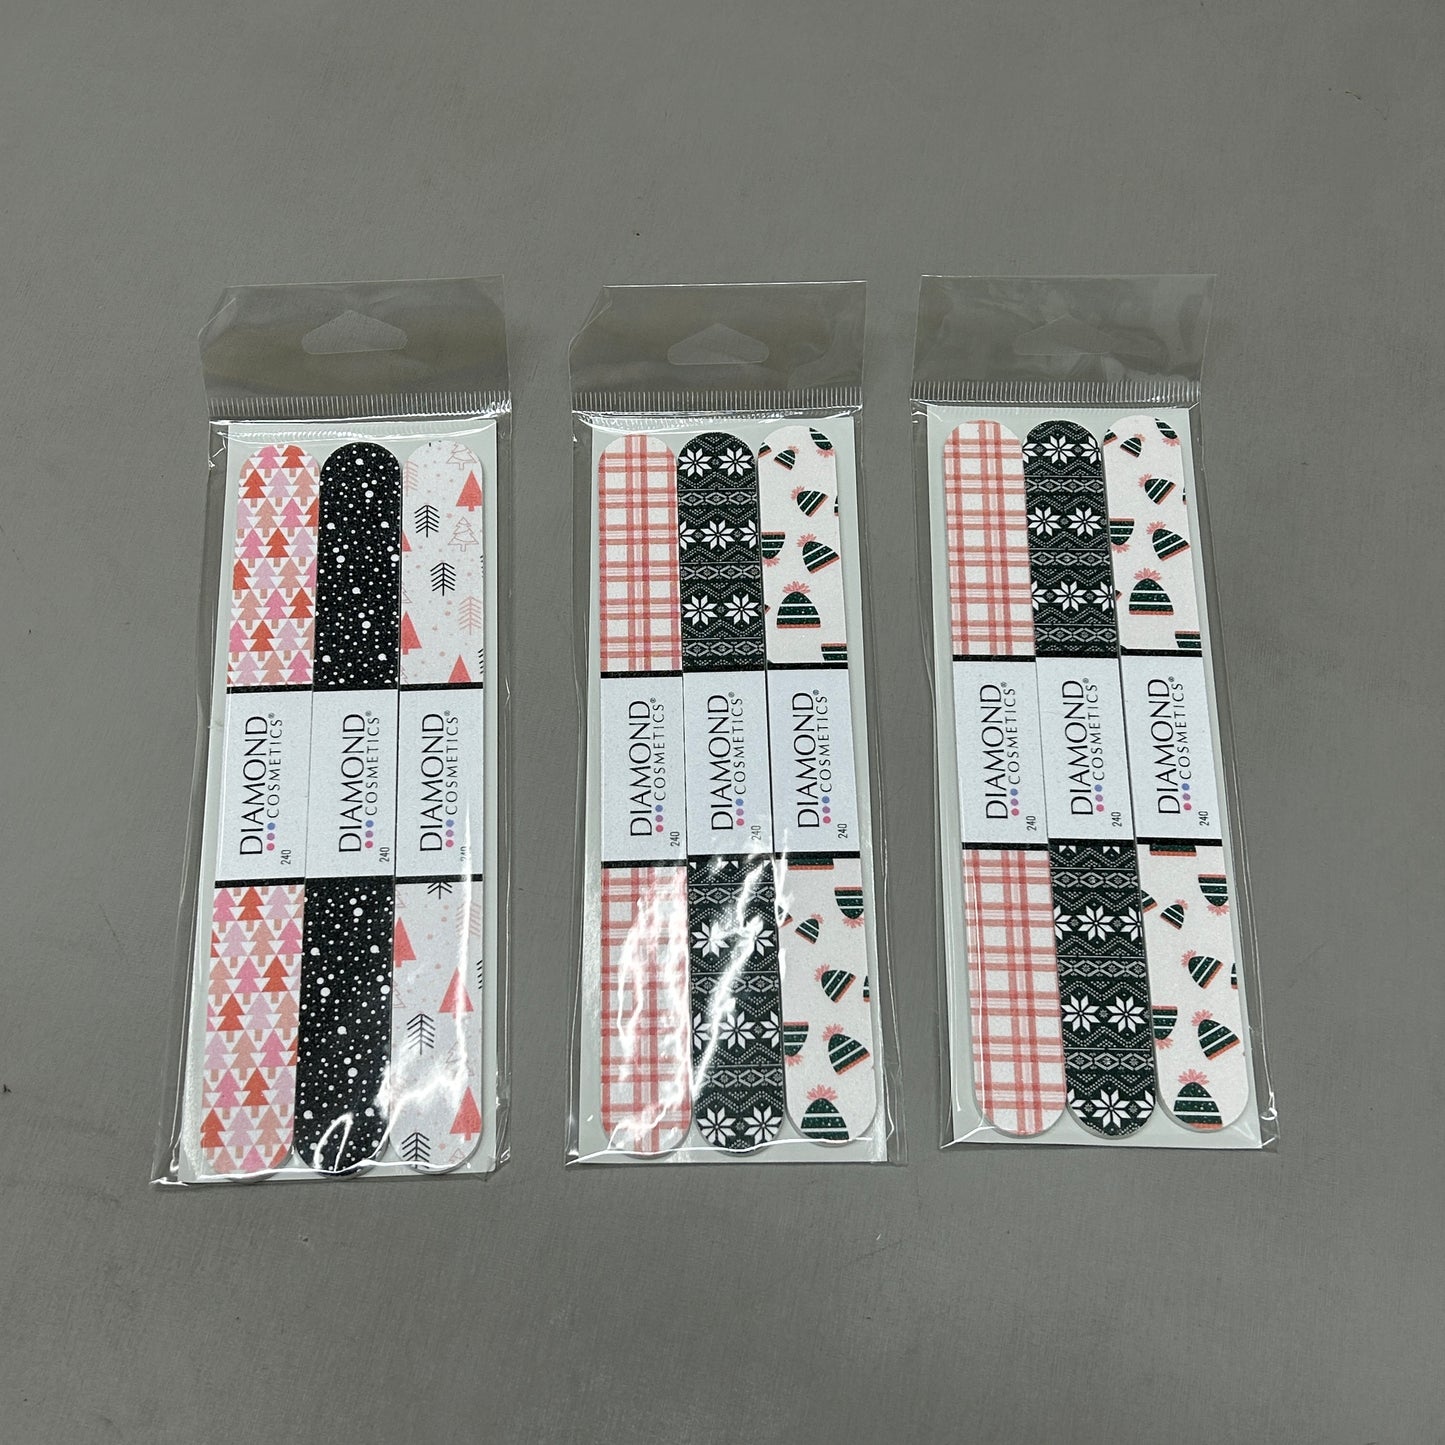 DIAMOND COSMETICS 3 Packs of 3! Holiday Nail Files Multiple Prints 85386DT (New)